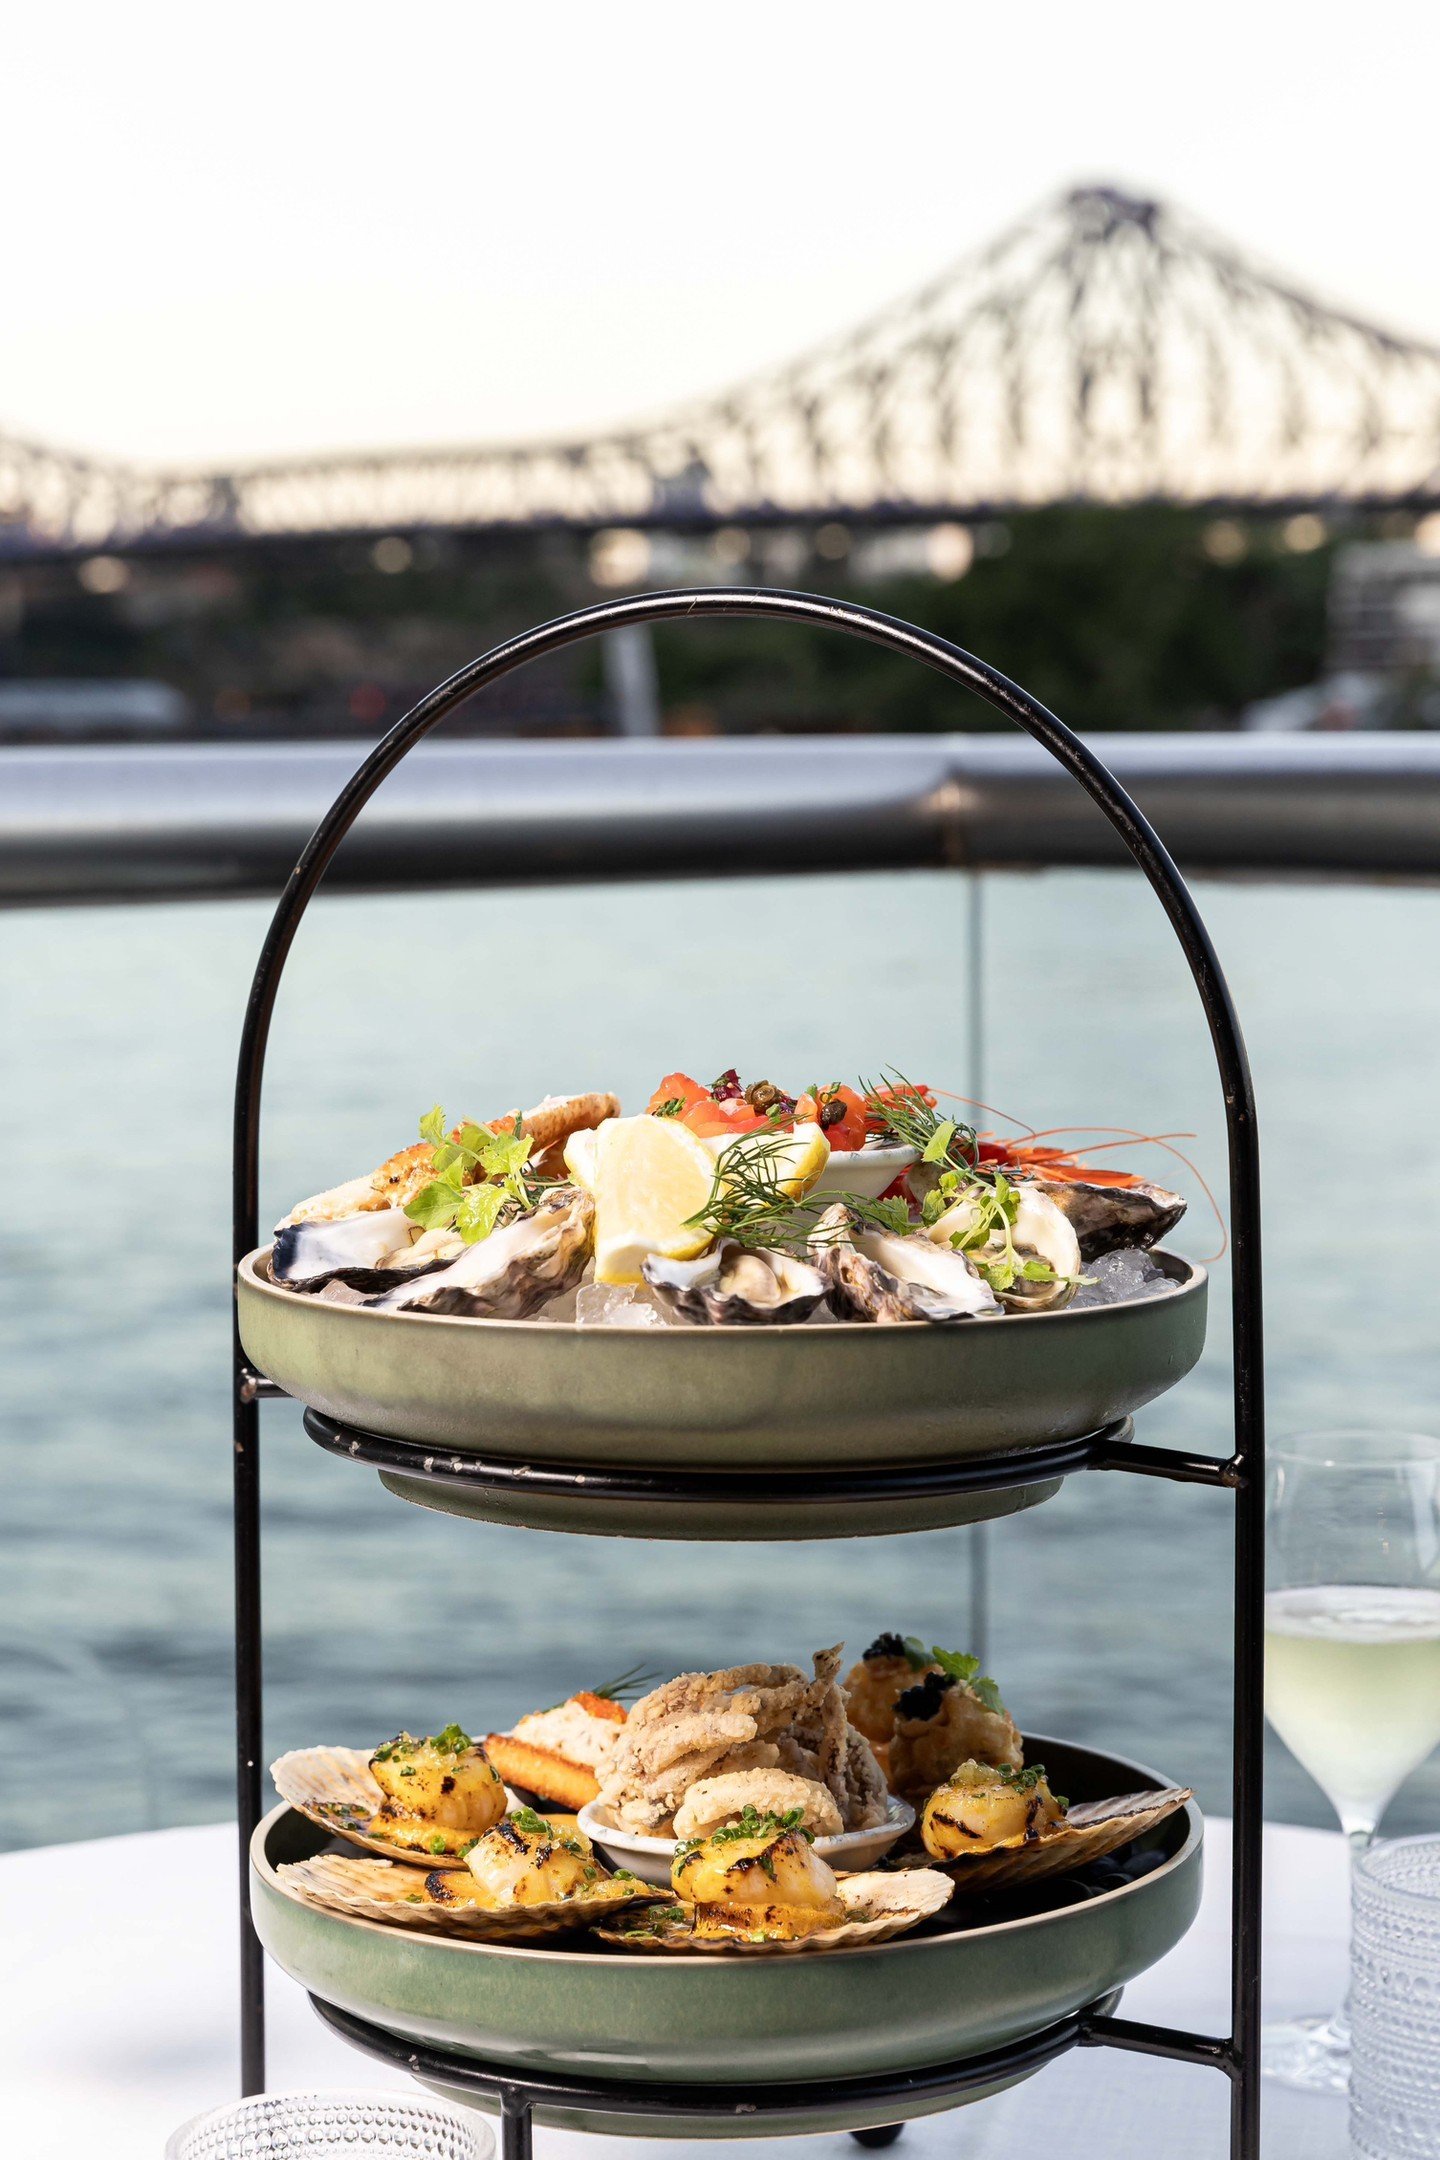 Vues Pour Deux (Views for Two)
Every Tuesday

Choosing one of our delicious seafood platter options below is easy.

Choosing who to share it with?
Well, that&rsquo;s where it gets a little harder

Partner, friends, family, work or girls catch up, we&